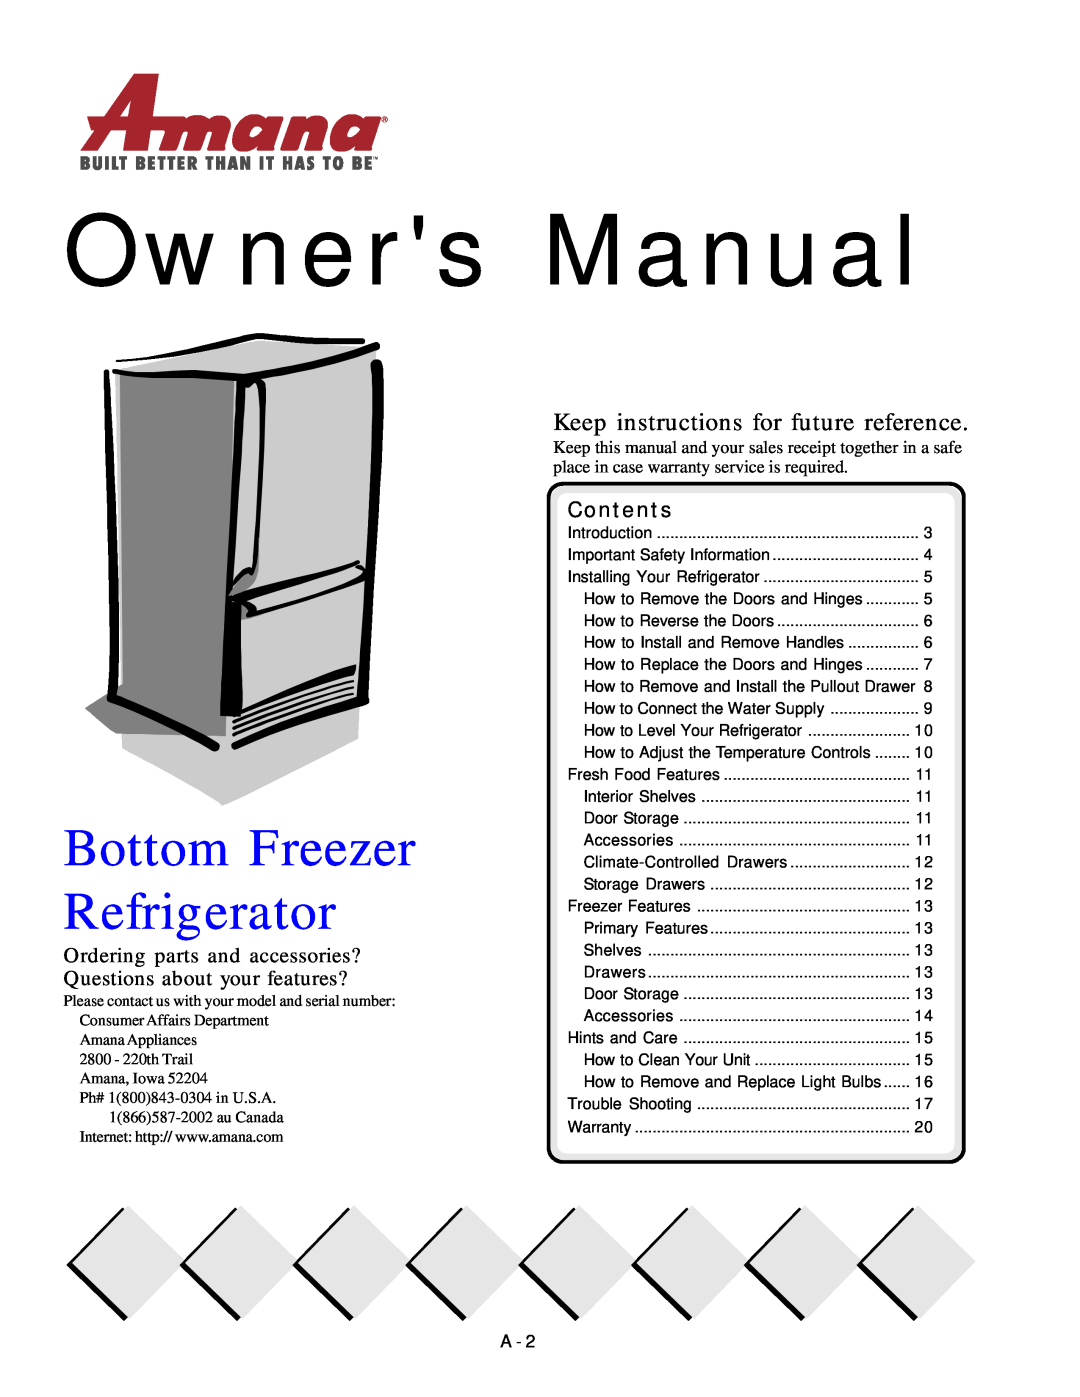 Amana Bottom-Freezer Refrigerator owner manual Keep instructions for future reference, Contents 